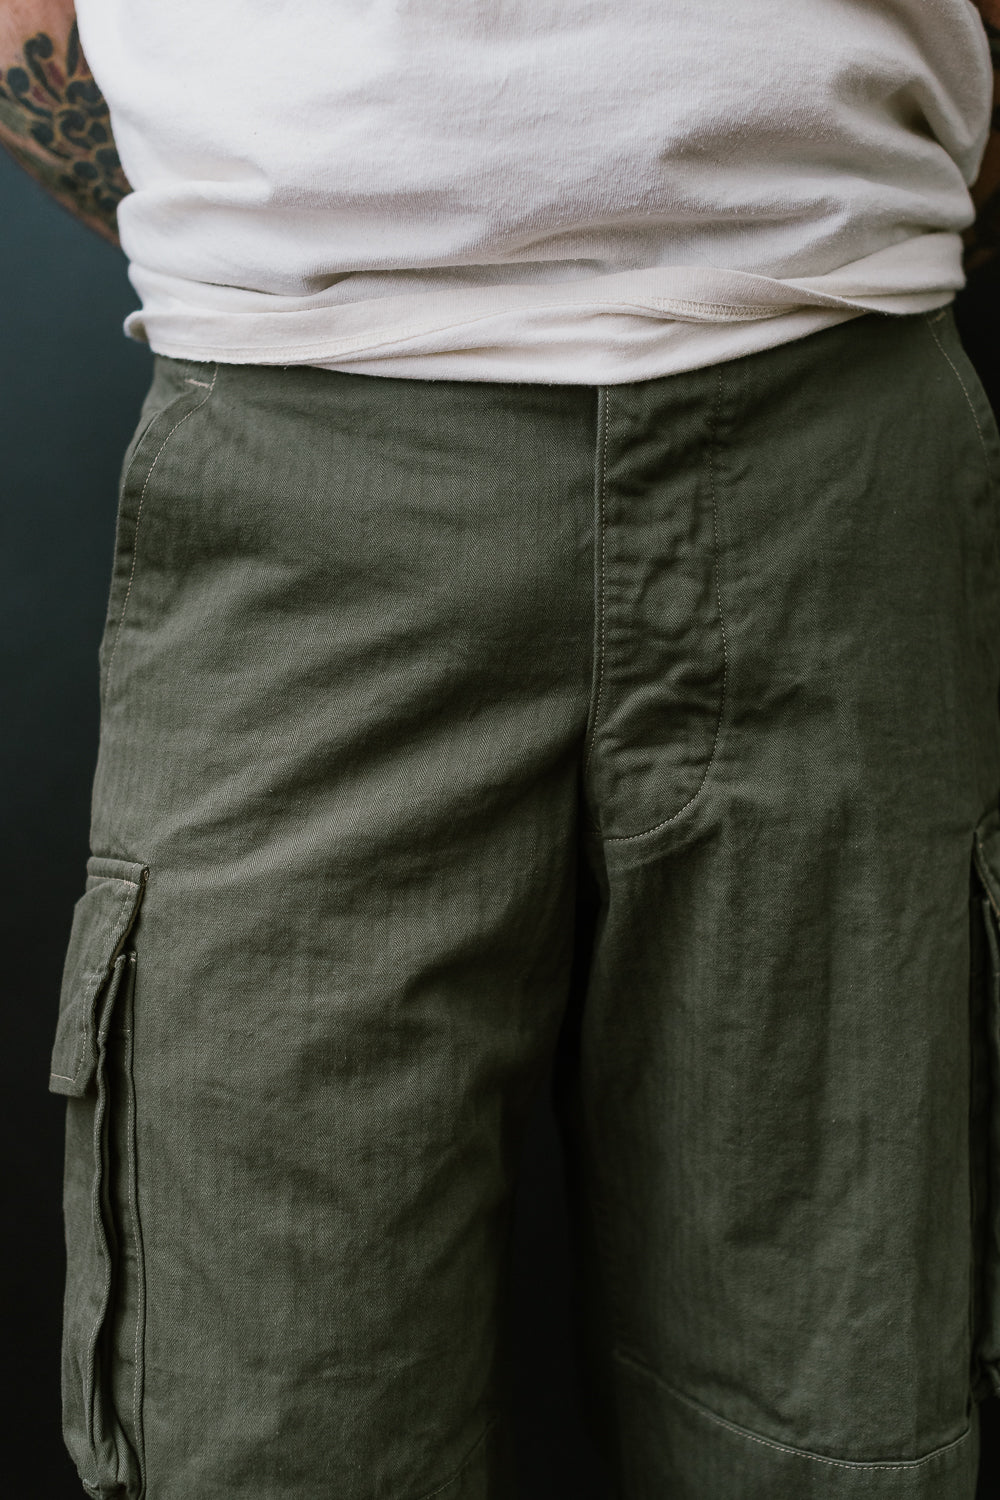 03-5247-76 - M-47 French Army Cargo Pants - Army Green